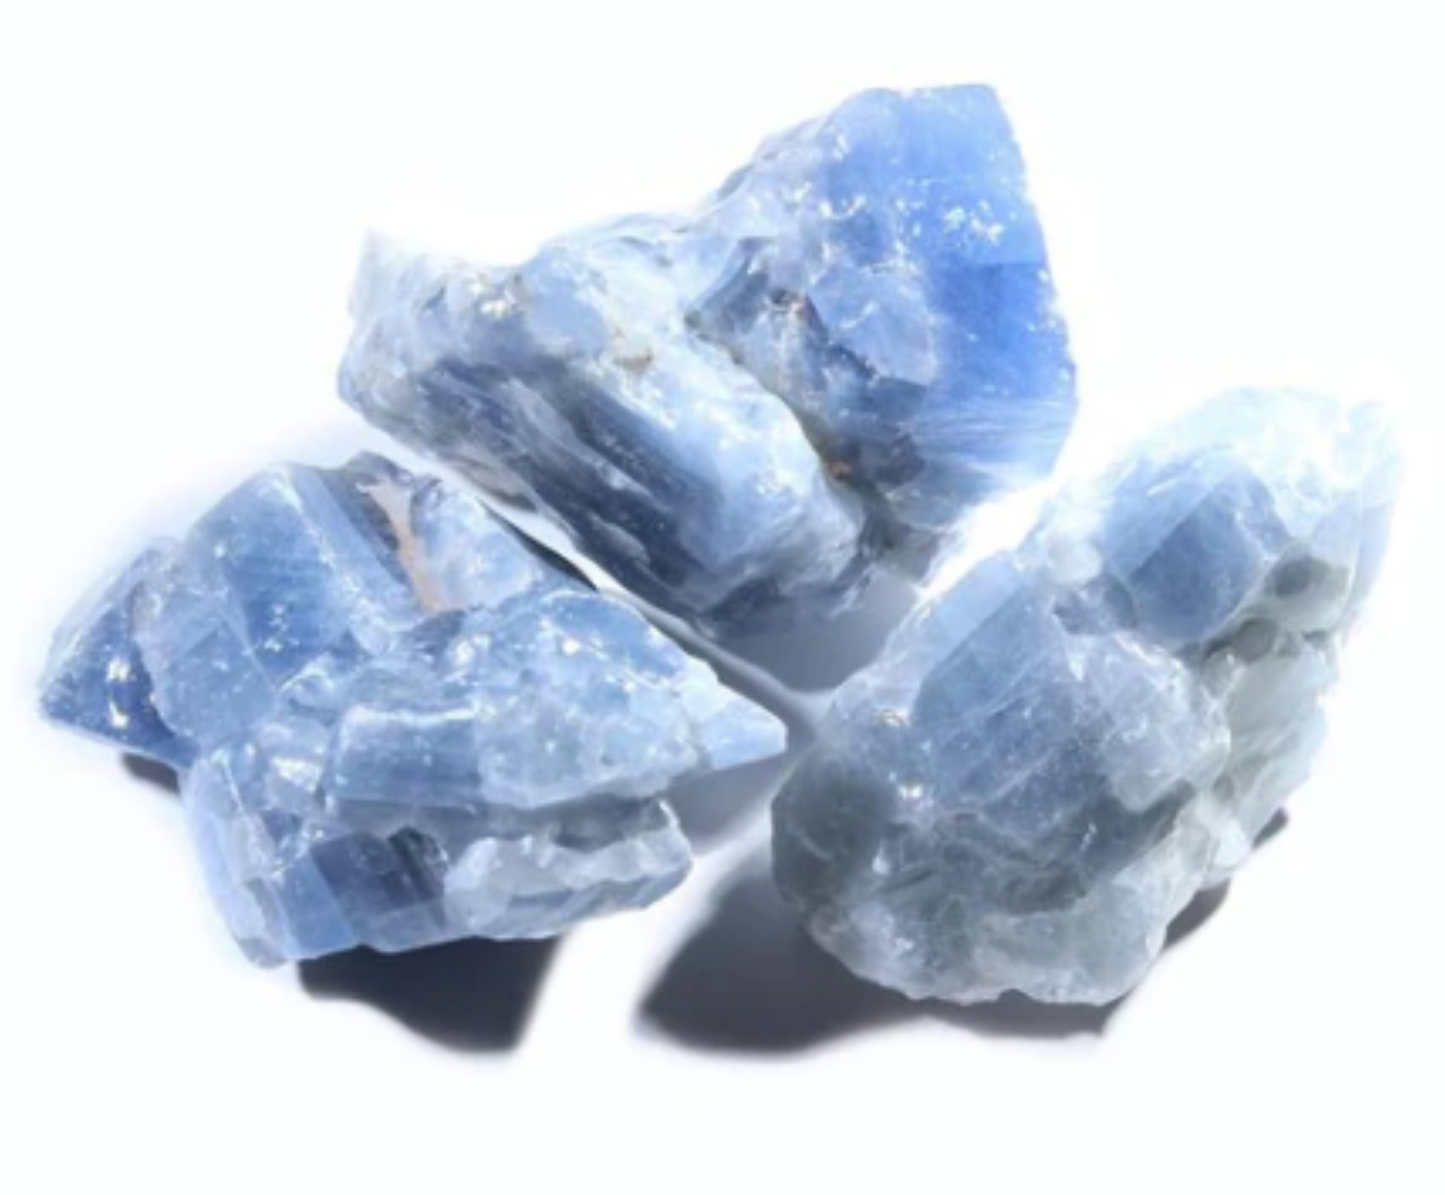 Blue Calcite Rough Rocks from Mexico | Raw Crystals